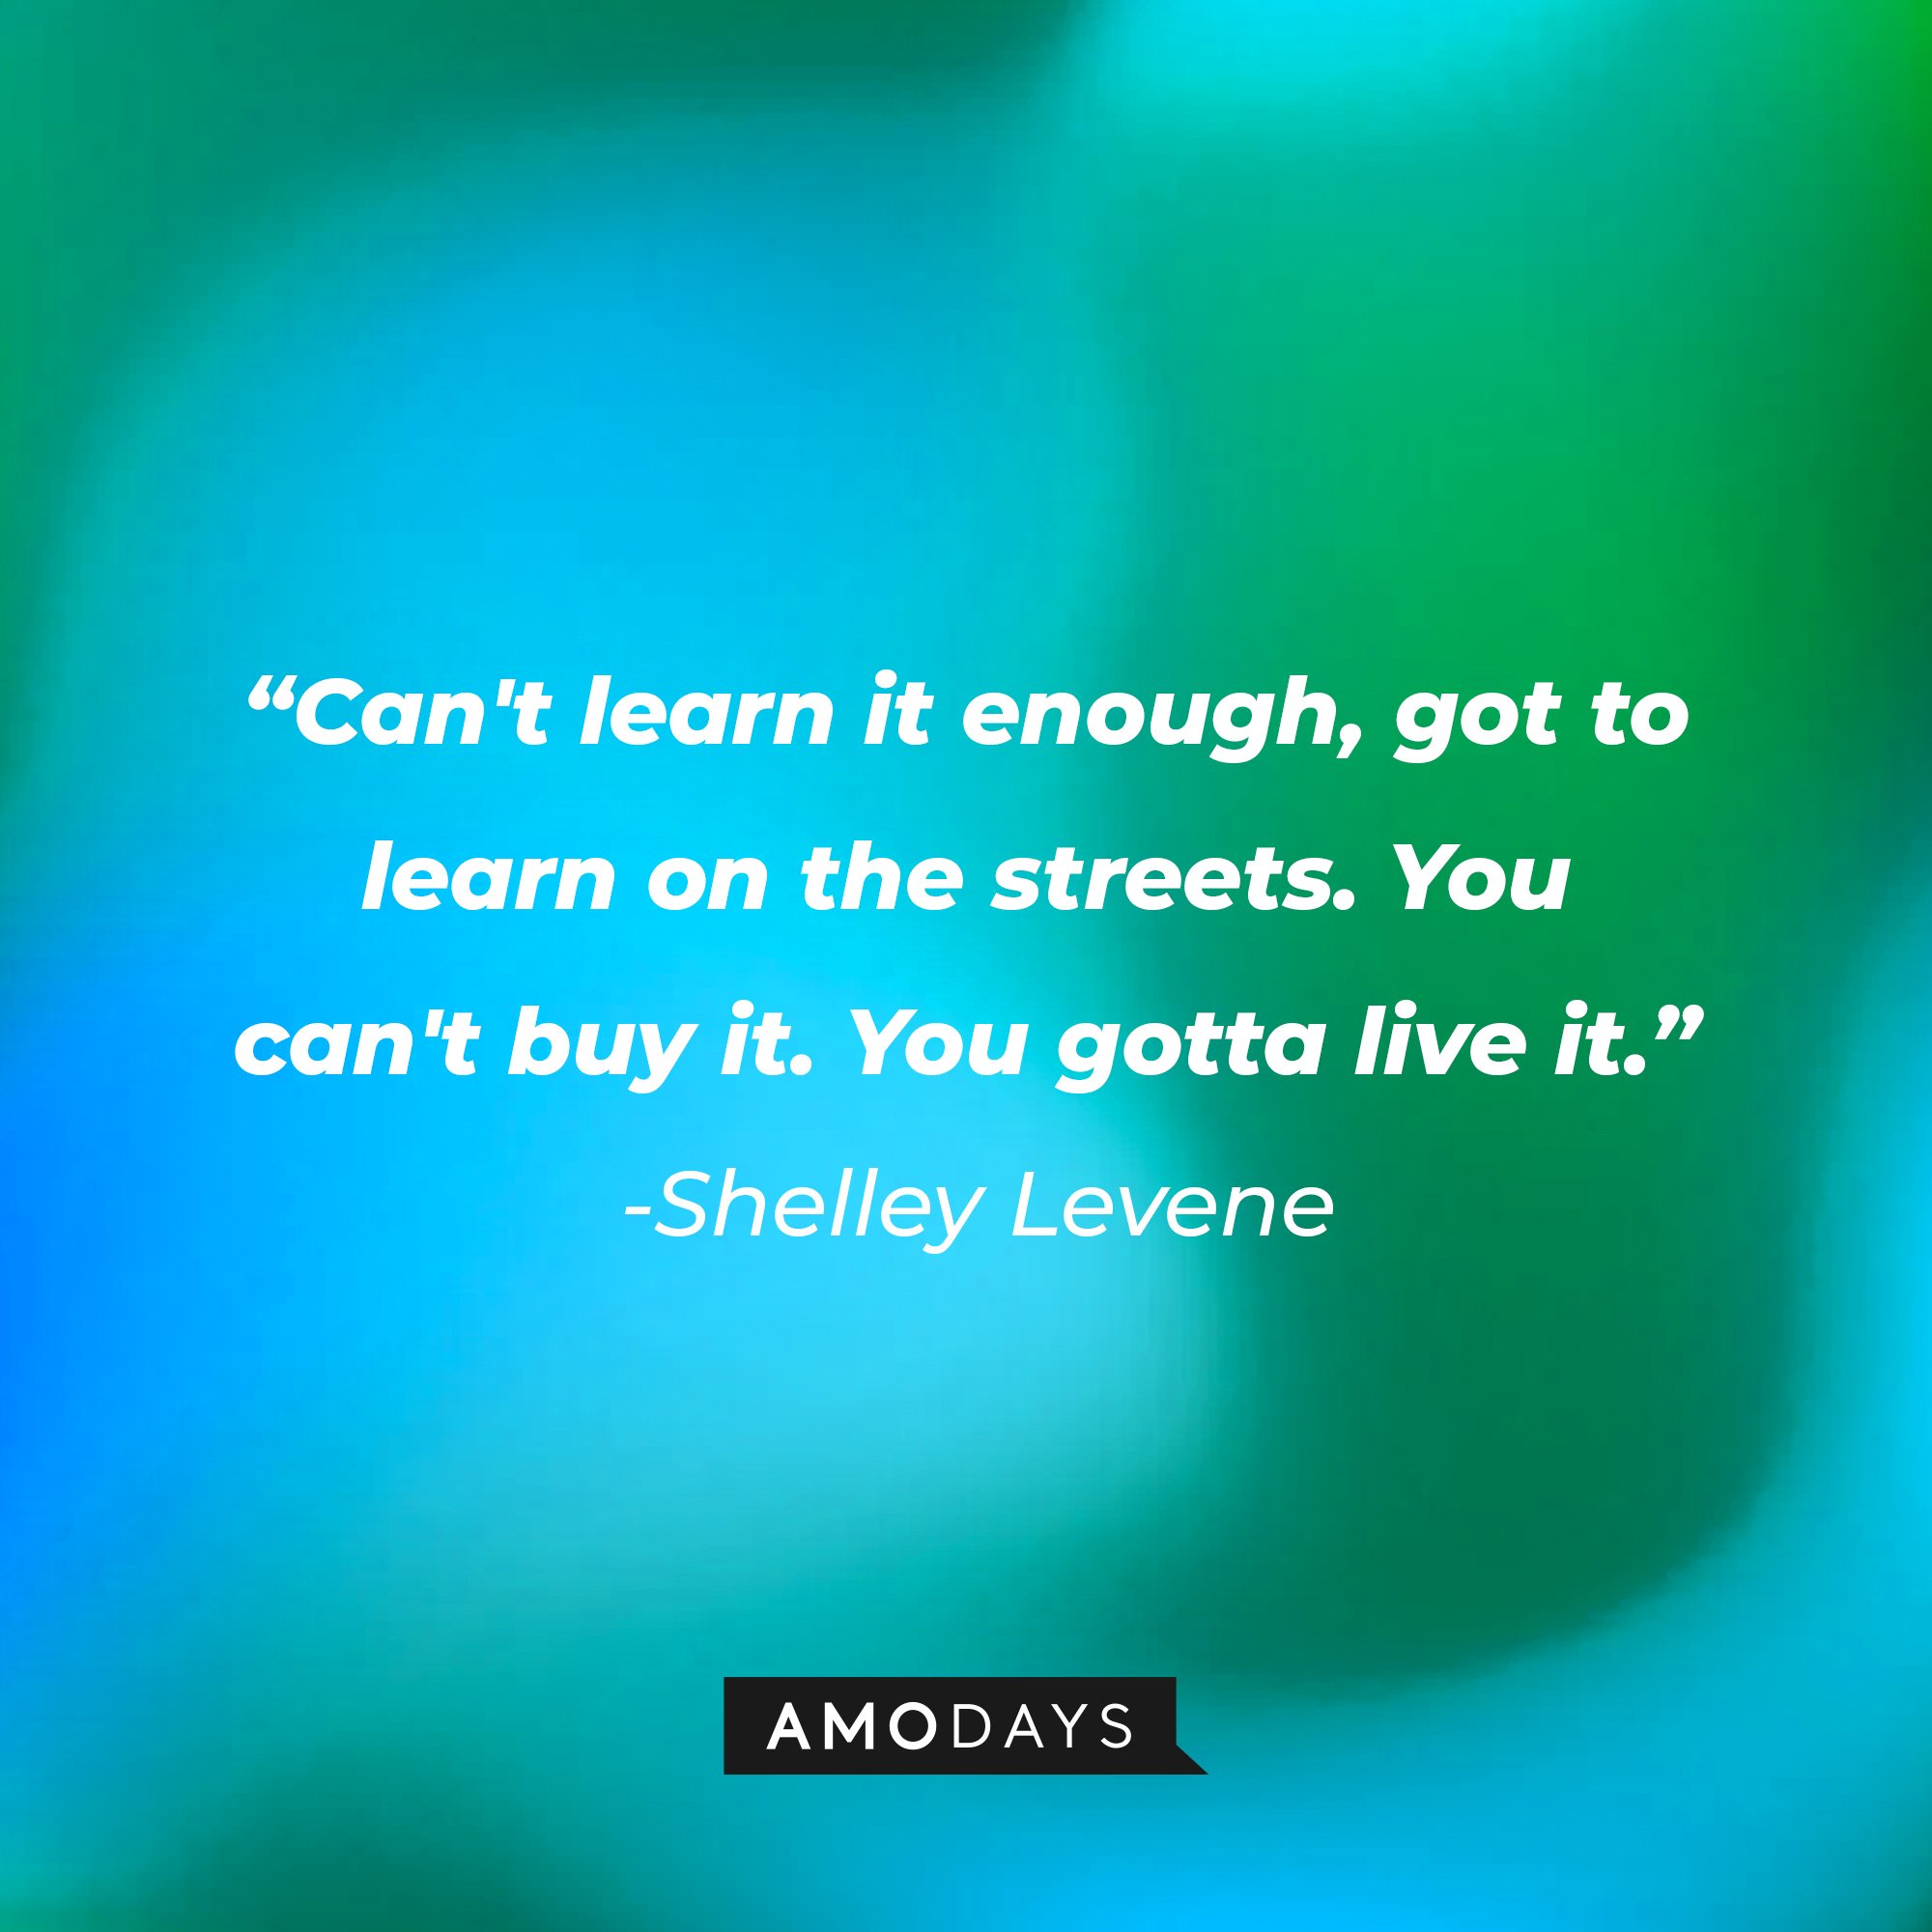 Shelley Levene's quote: "Can't learn it enough, got to learn on the streets. You can't buy it. You gotta live it." | Image: AmoDays